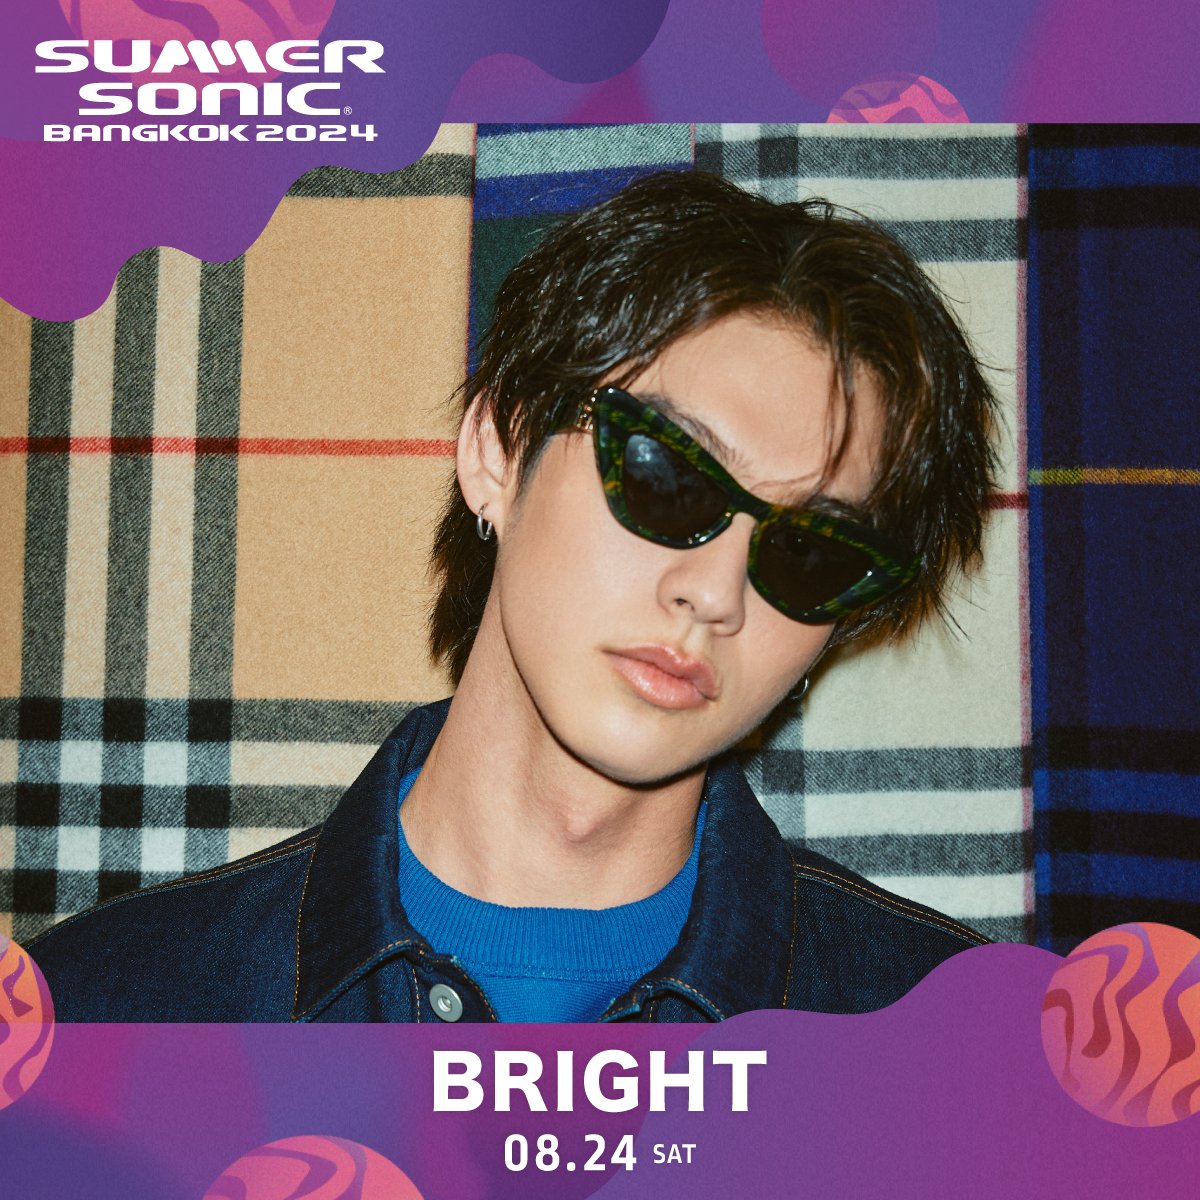 📆 #BRIGHTsSchedule at #summersonic2024  

⚡ #summersonic 🇯🇵
8/17 Tokyo - PACIFIC STAGE
8/18 Osaka - MASSIVE STAGE

⚡ #summersonicbangkok #summersonicbkk 🇹🇭
8/24 IMPACT Challenger Hall 1-3

Bright Vachirawit
#BrightVachirawit
#bbrightvc @bbrightvc